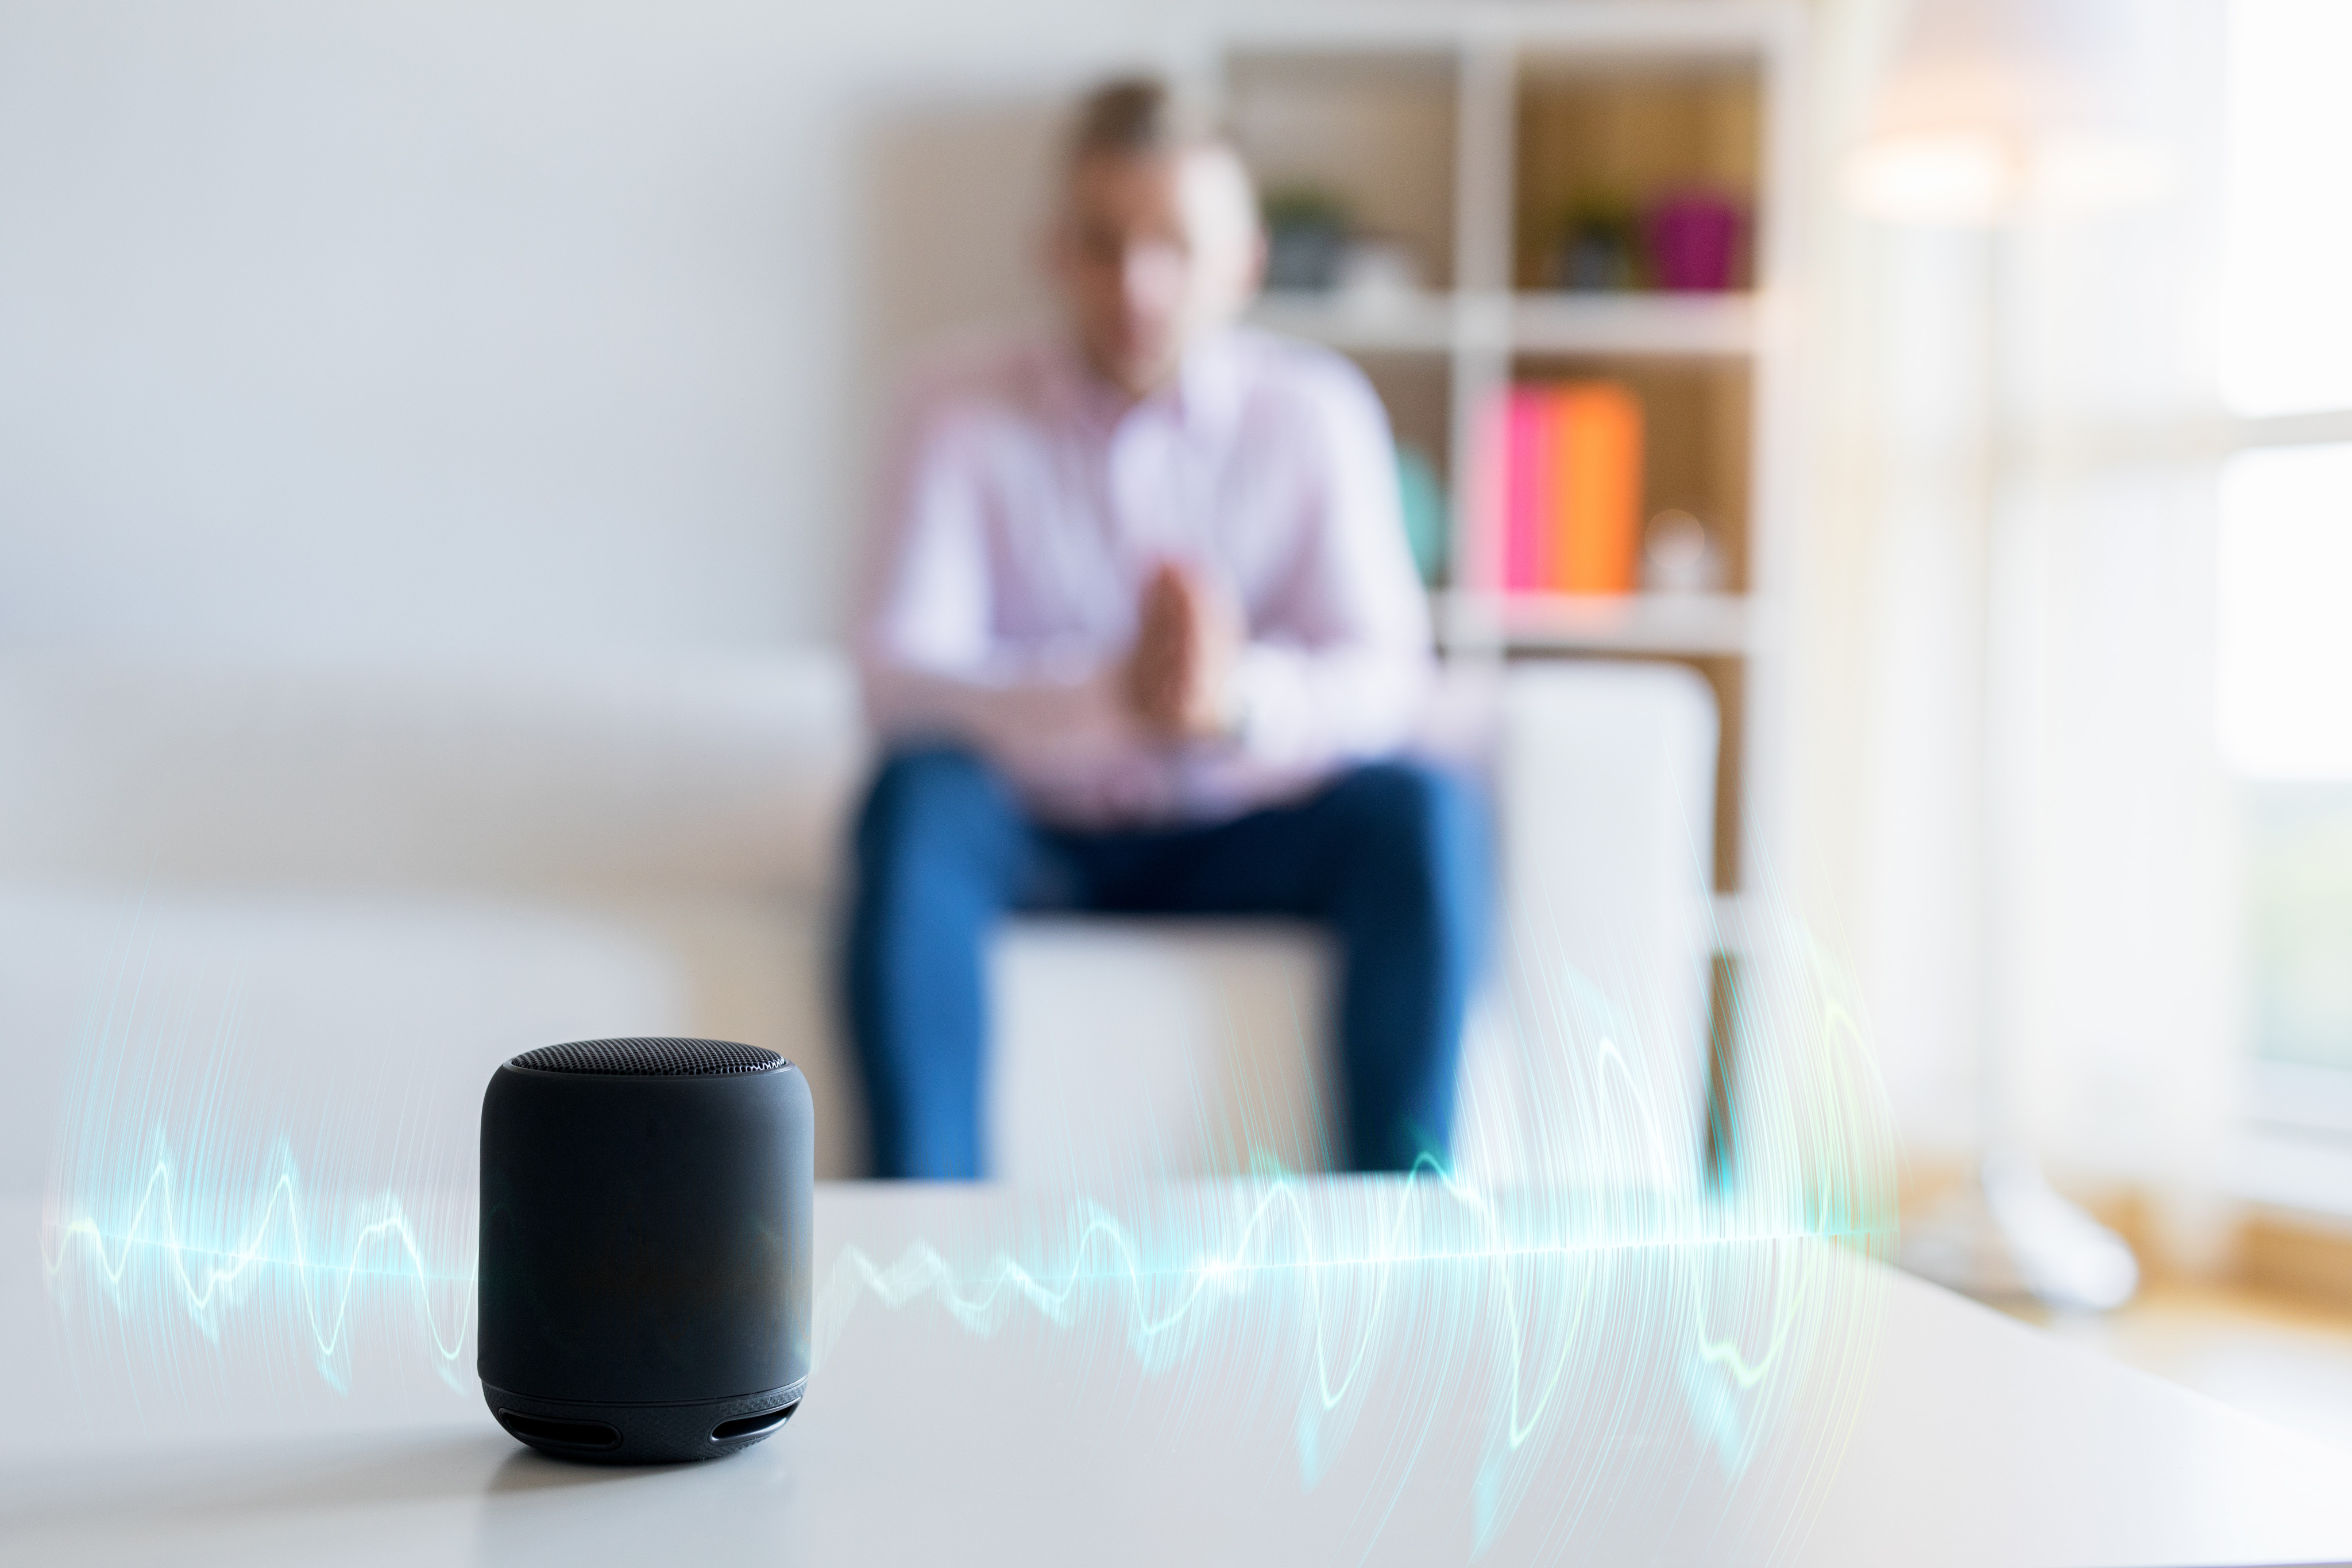 The Biden administration is trying to give consumers confidence about buying secure smart home products with a new certification programme. Photo: Shutterstock